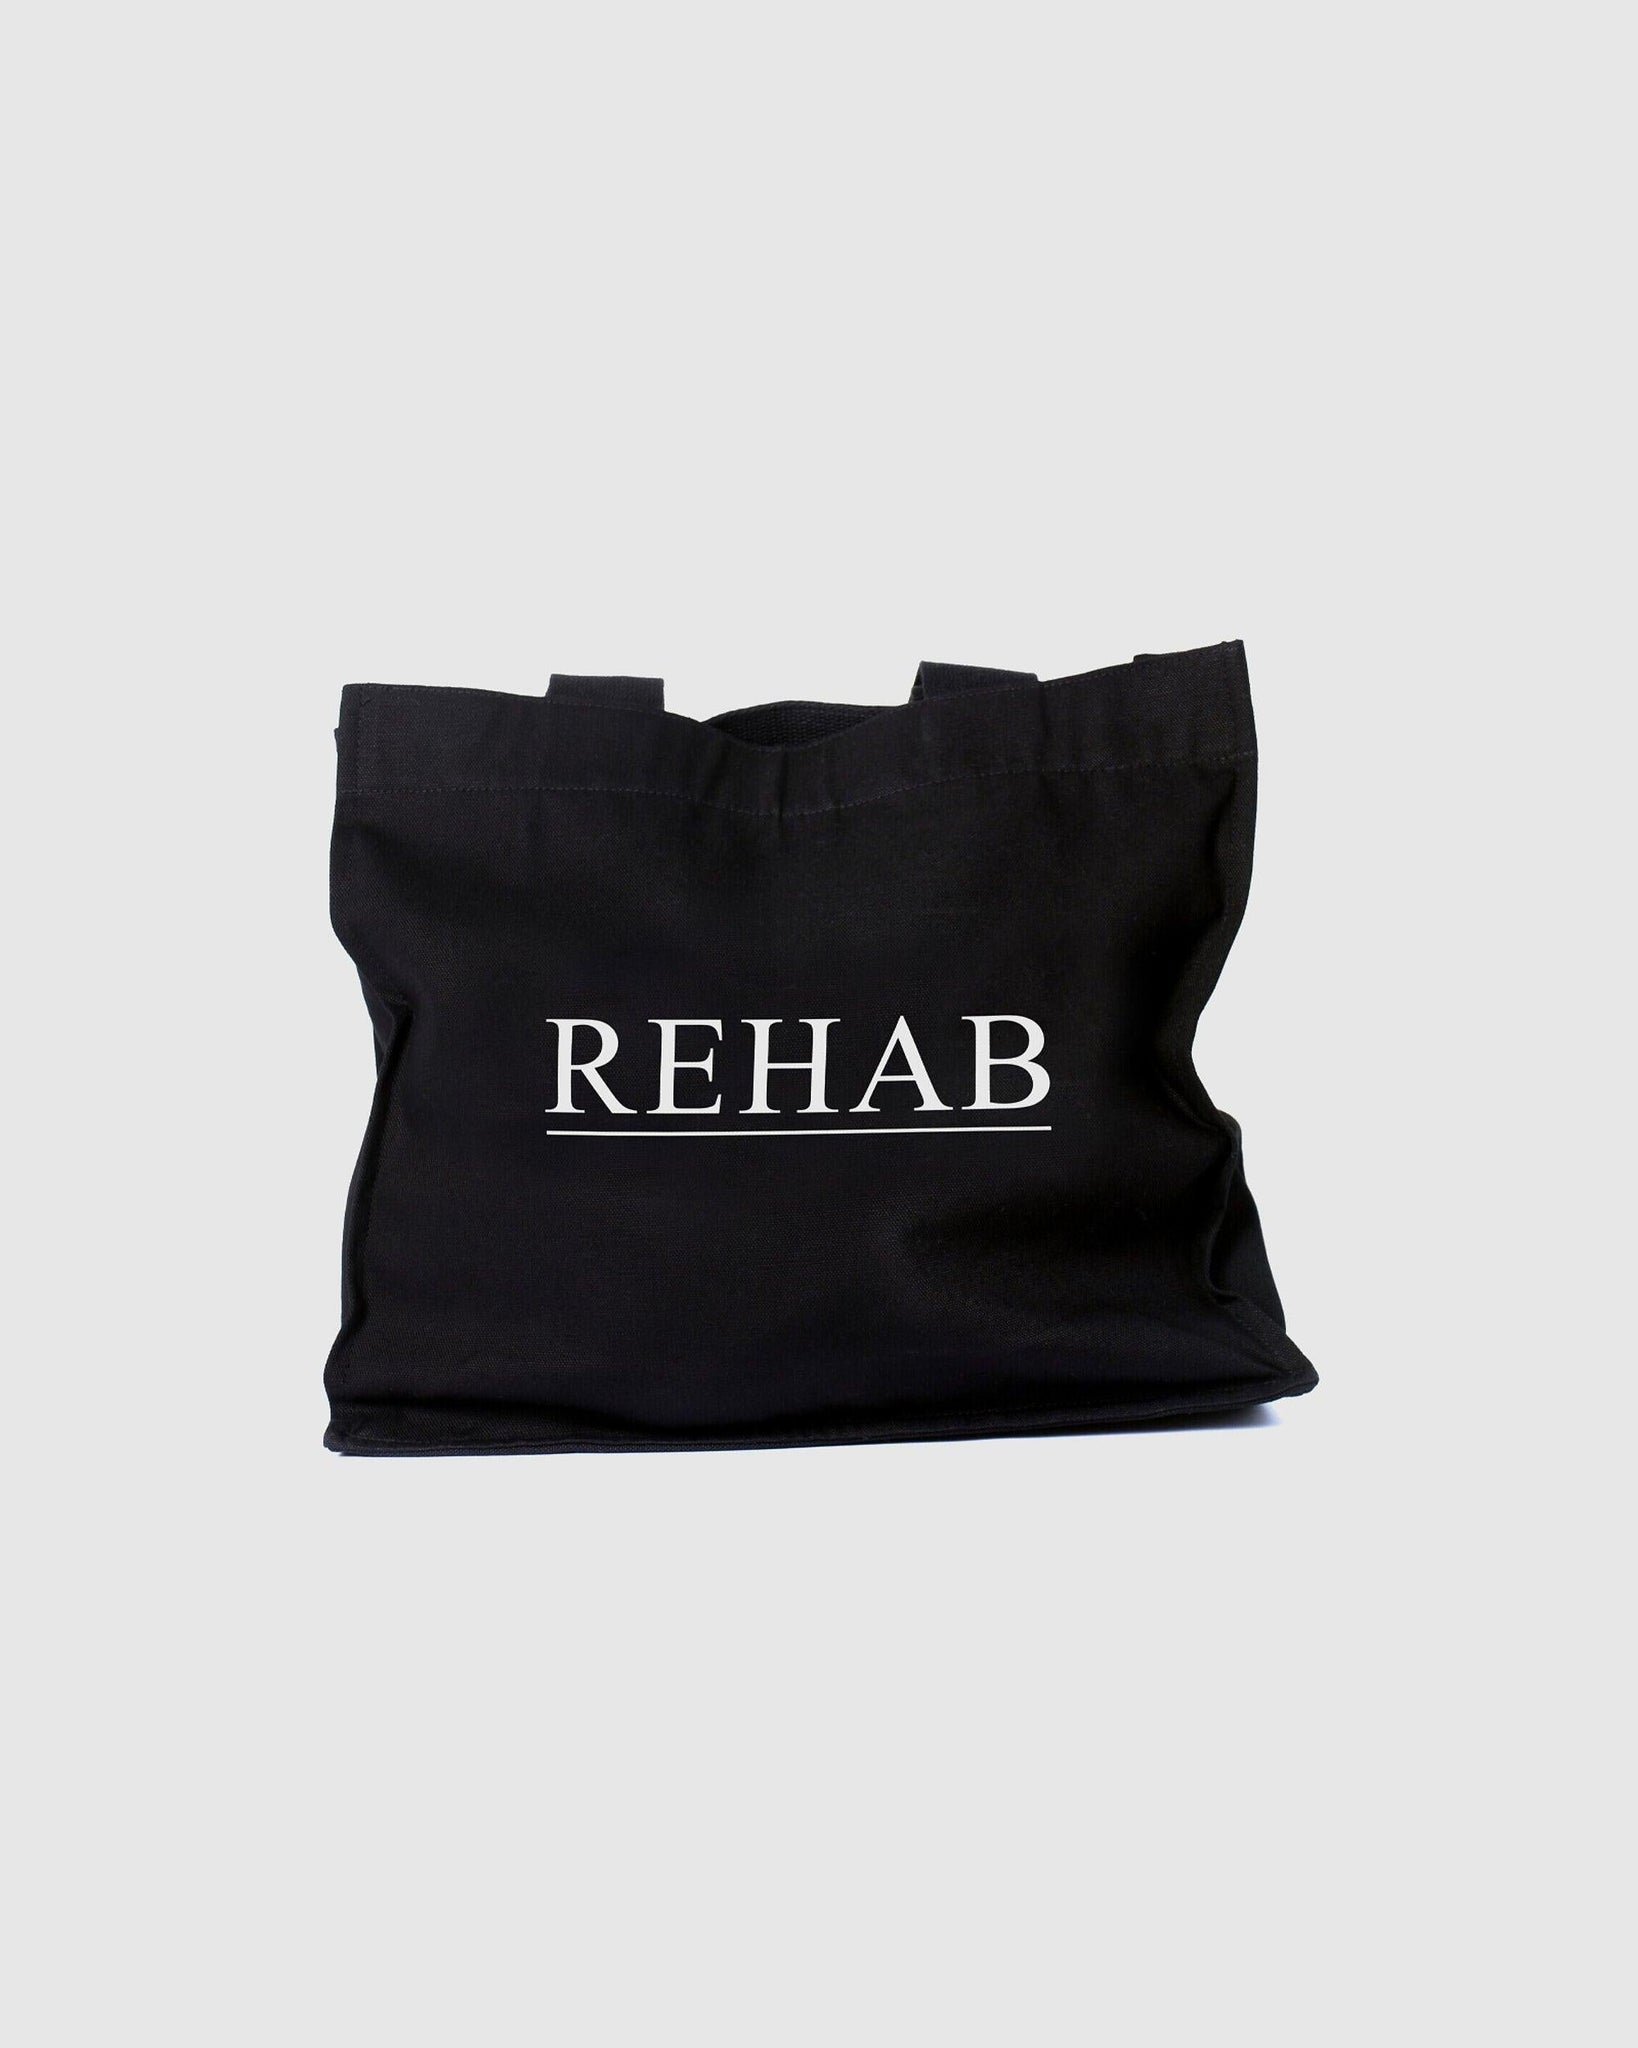 Rehab Bag Black - {{ collection.title }} - Chinatown Country Club 